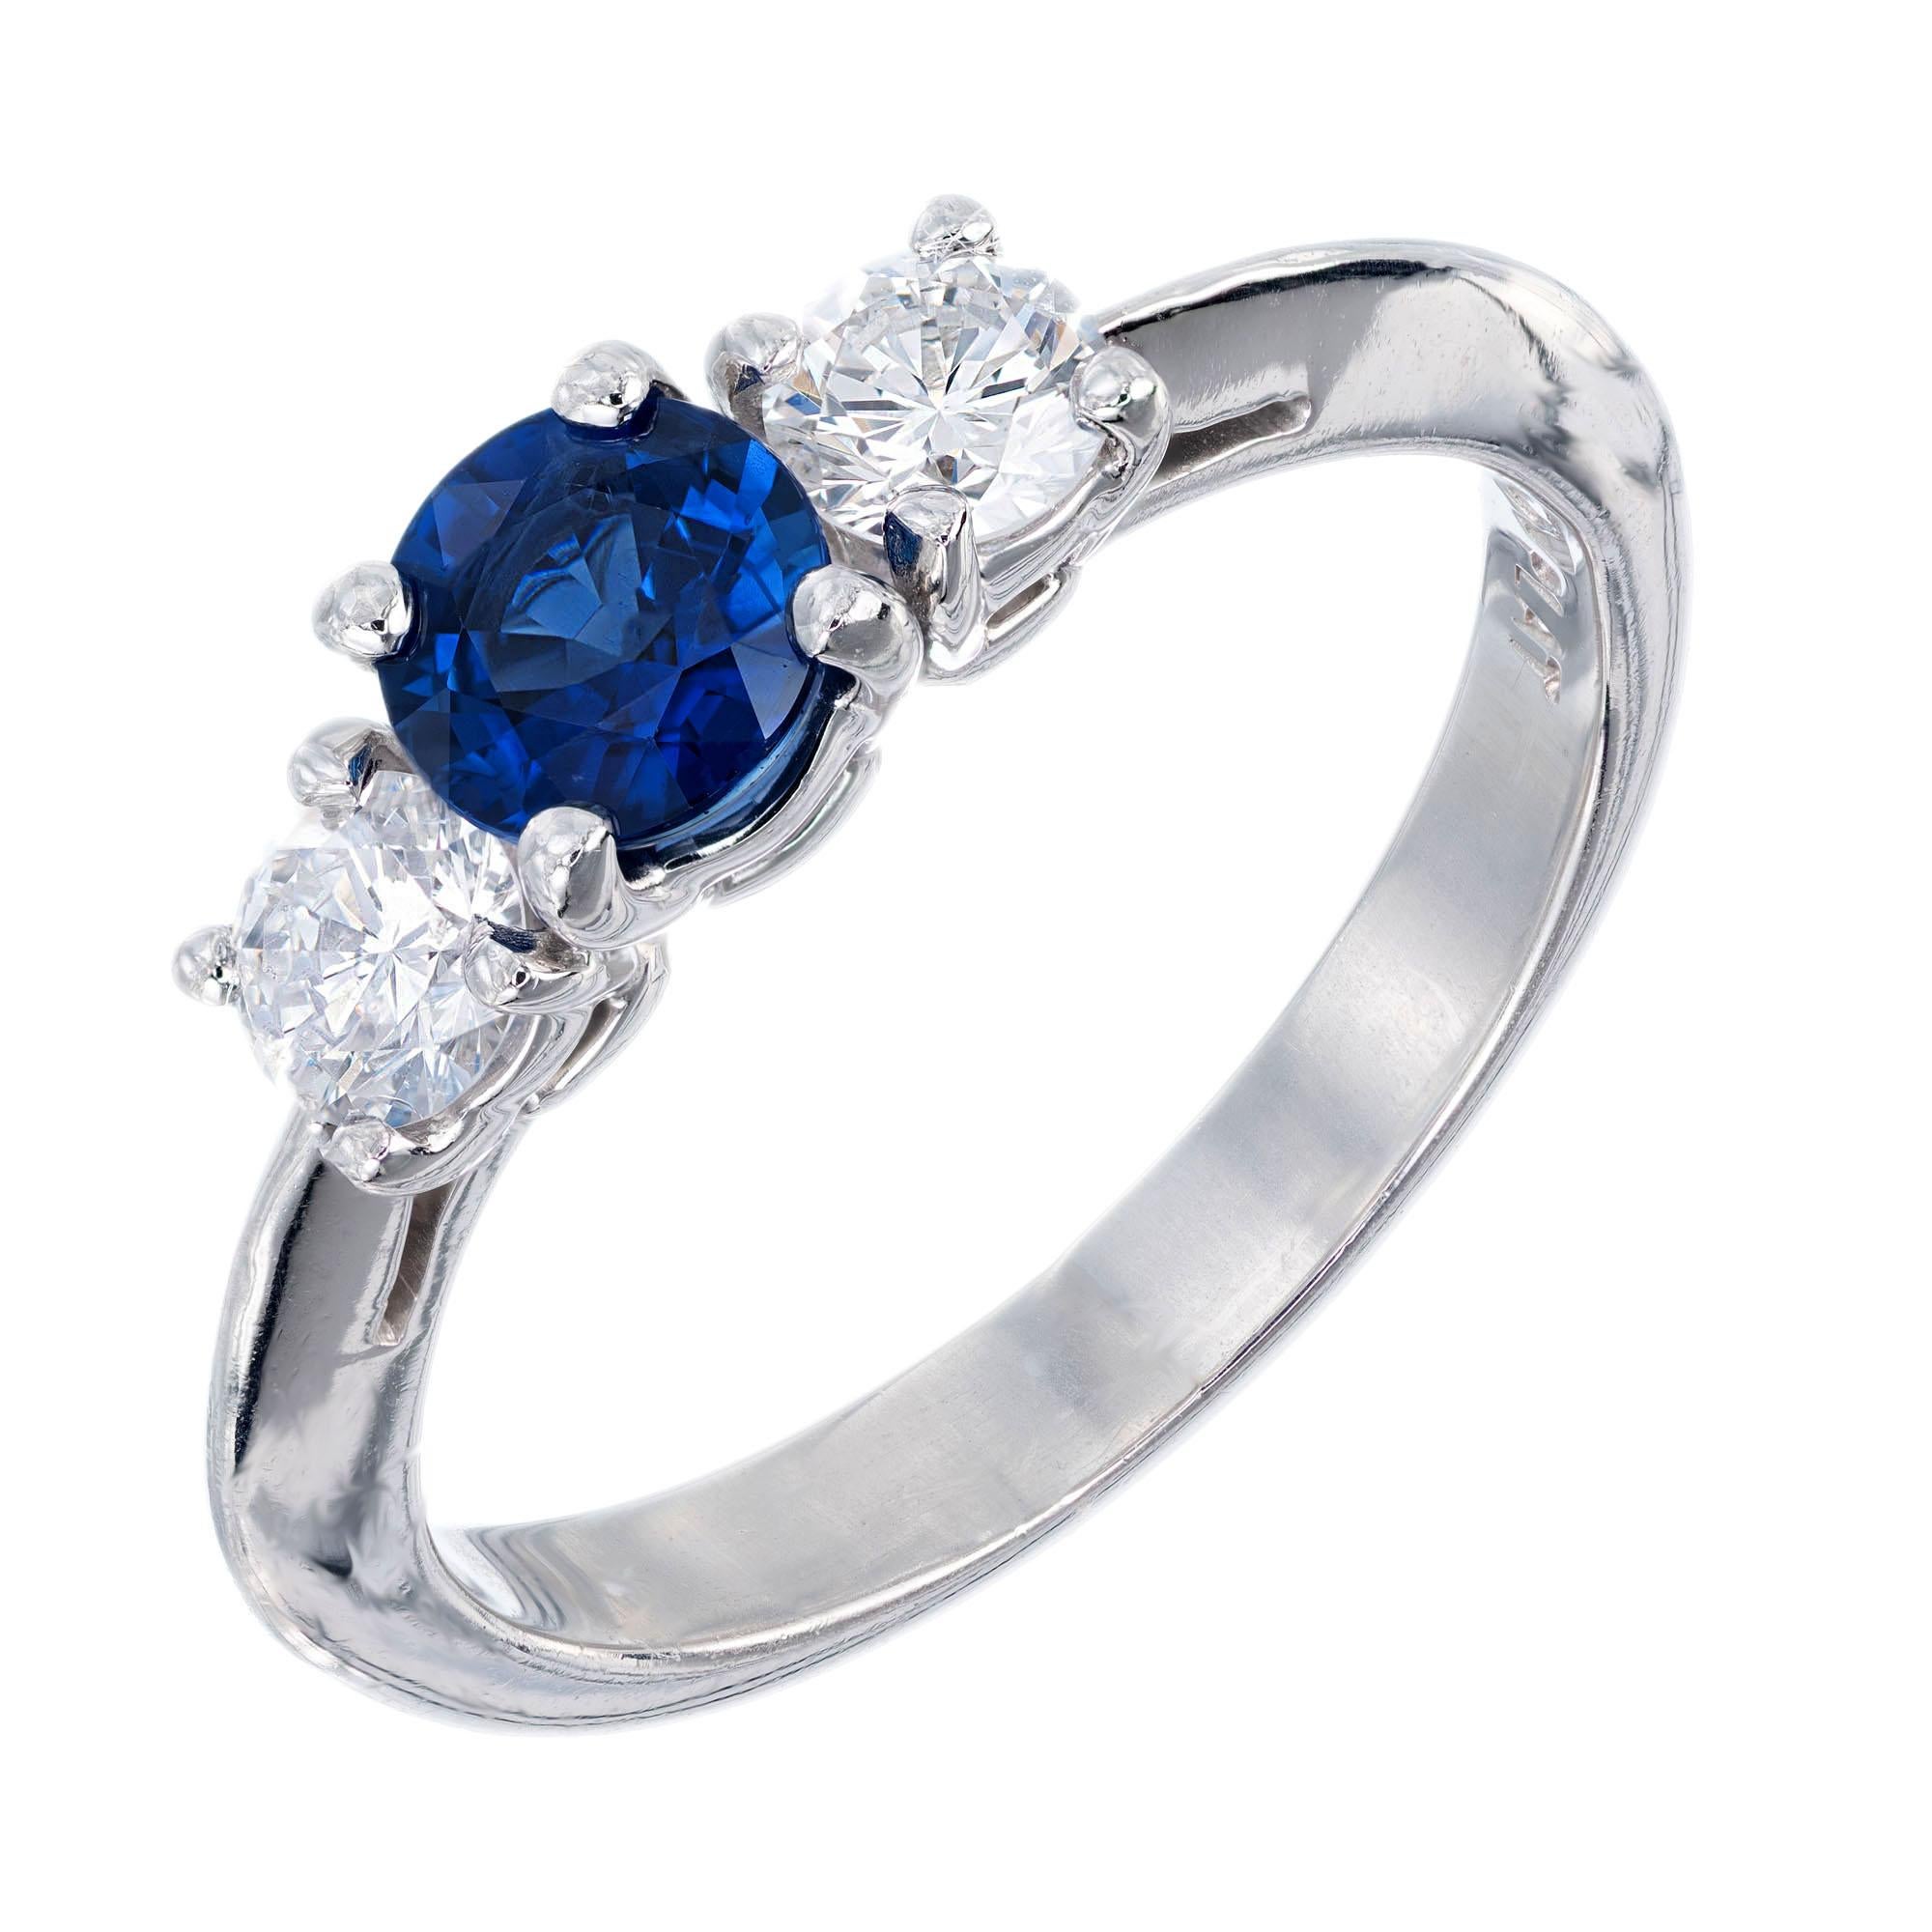 Cornflower blue round sapphire center stone with two round accent diamonds in a platinum three-stone setting. GIA certified center stone. 

1 round cornflower blue Sapphire, approx. total weight .65cts, SI1, 4.90 x 4.80 x 3mm, CMT Type 1, simple